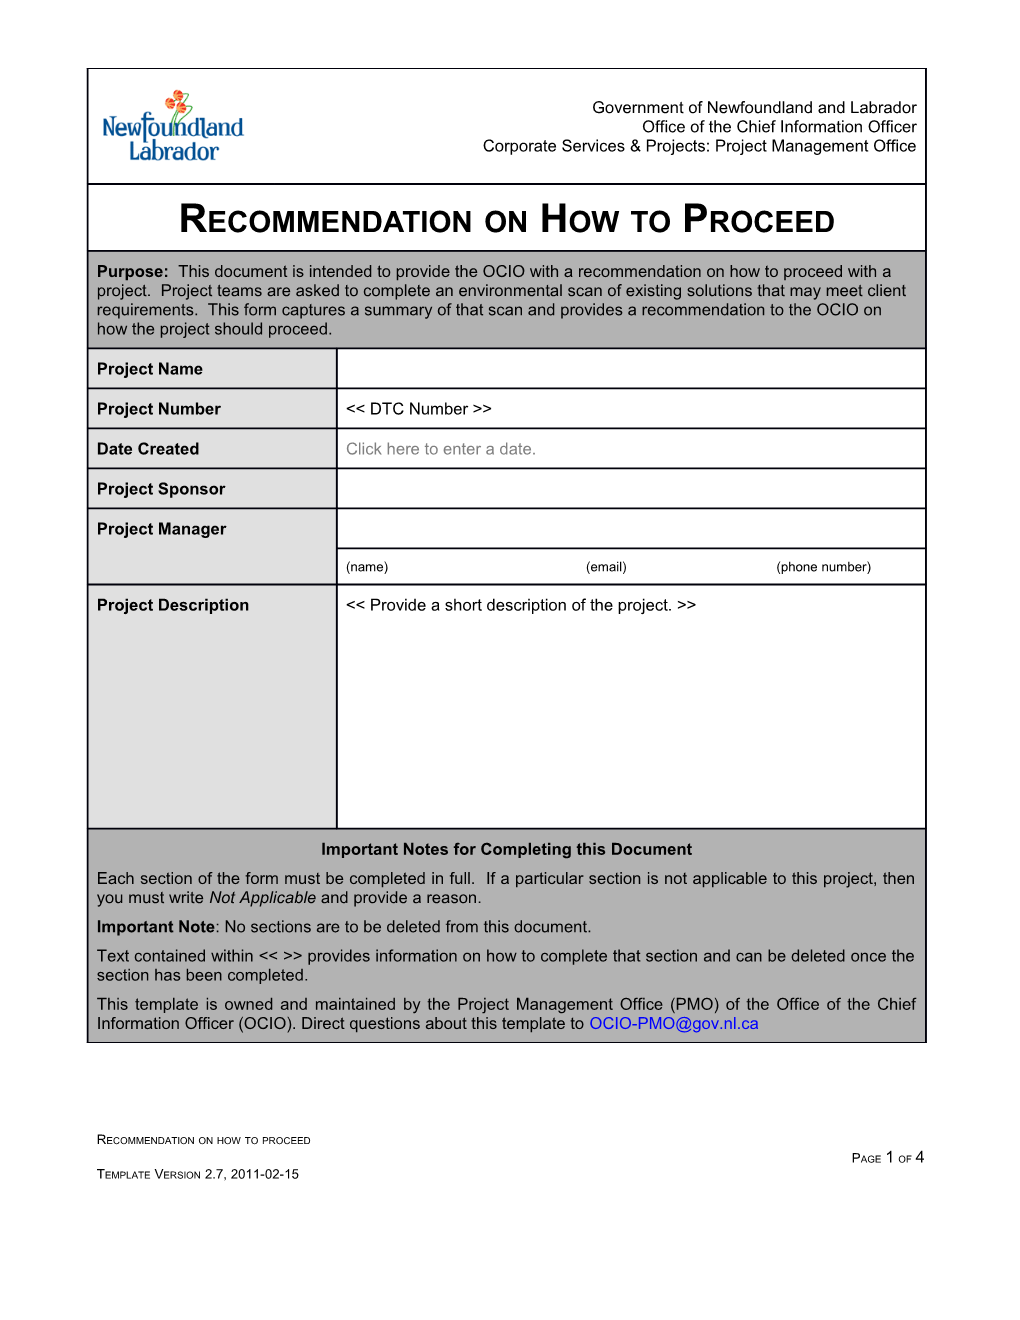 Recommendation on How to Proceed